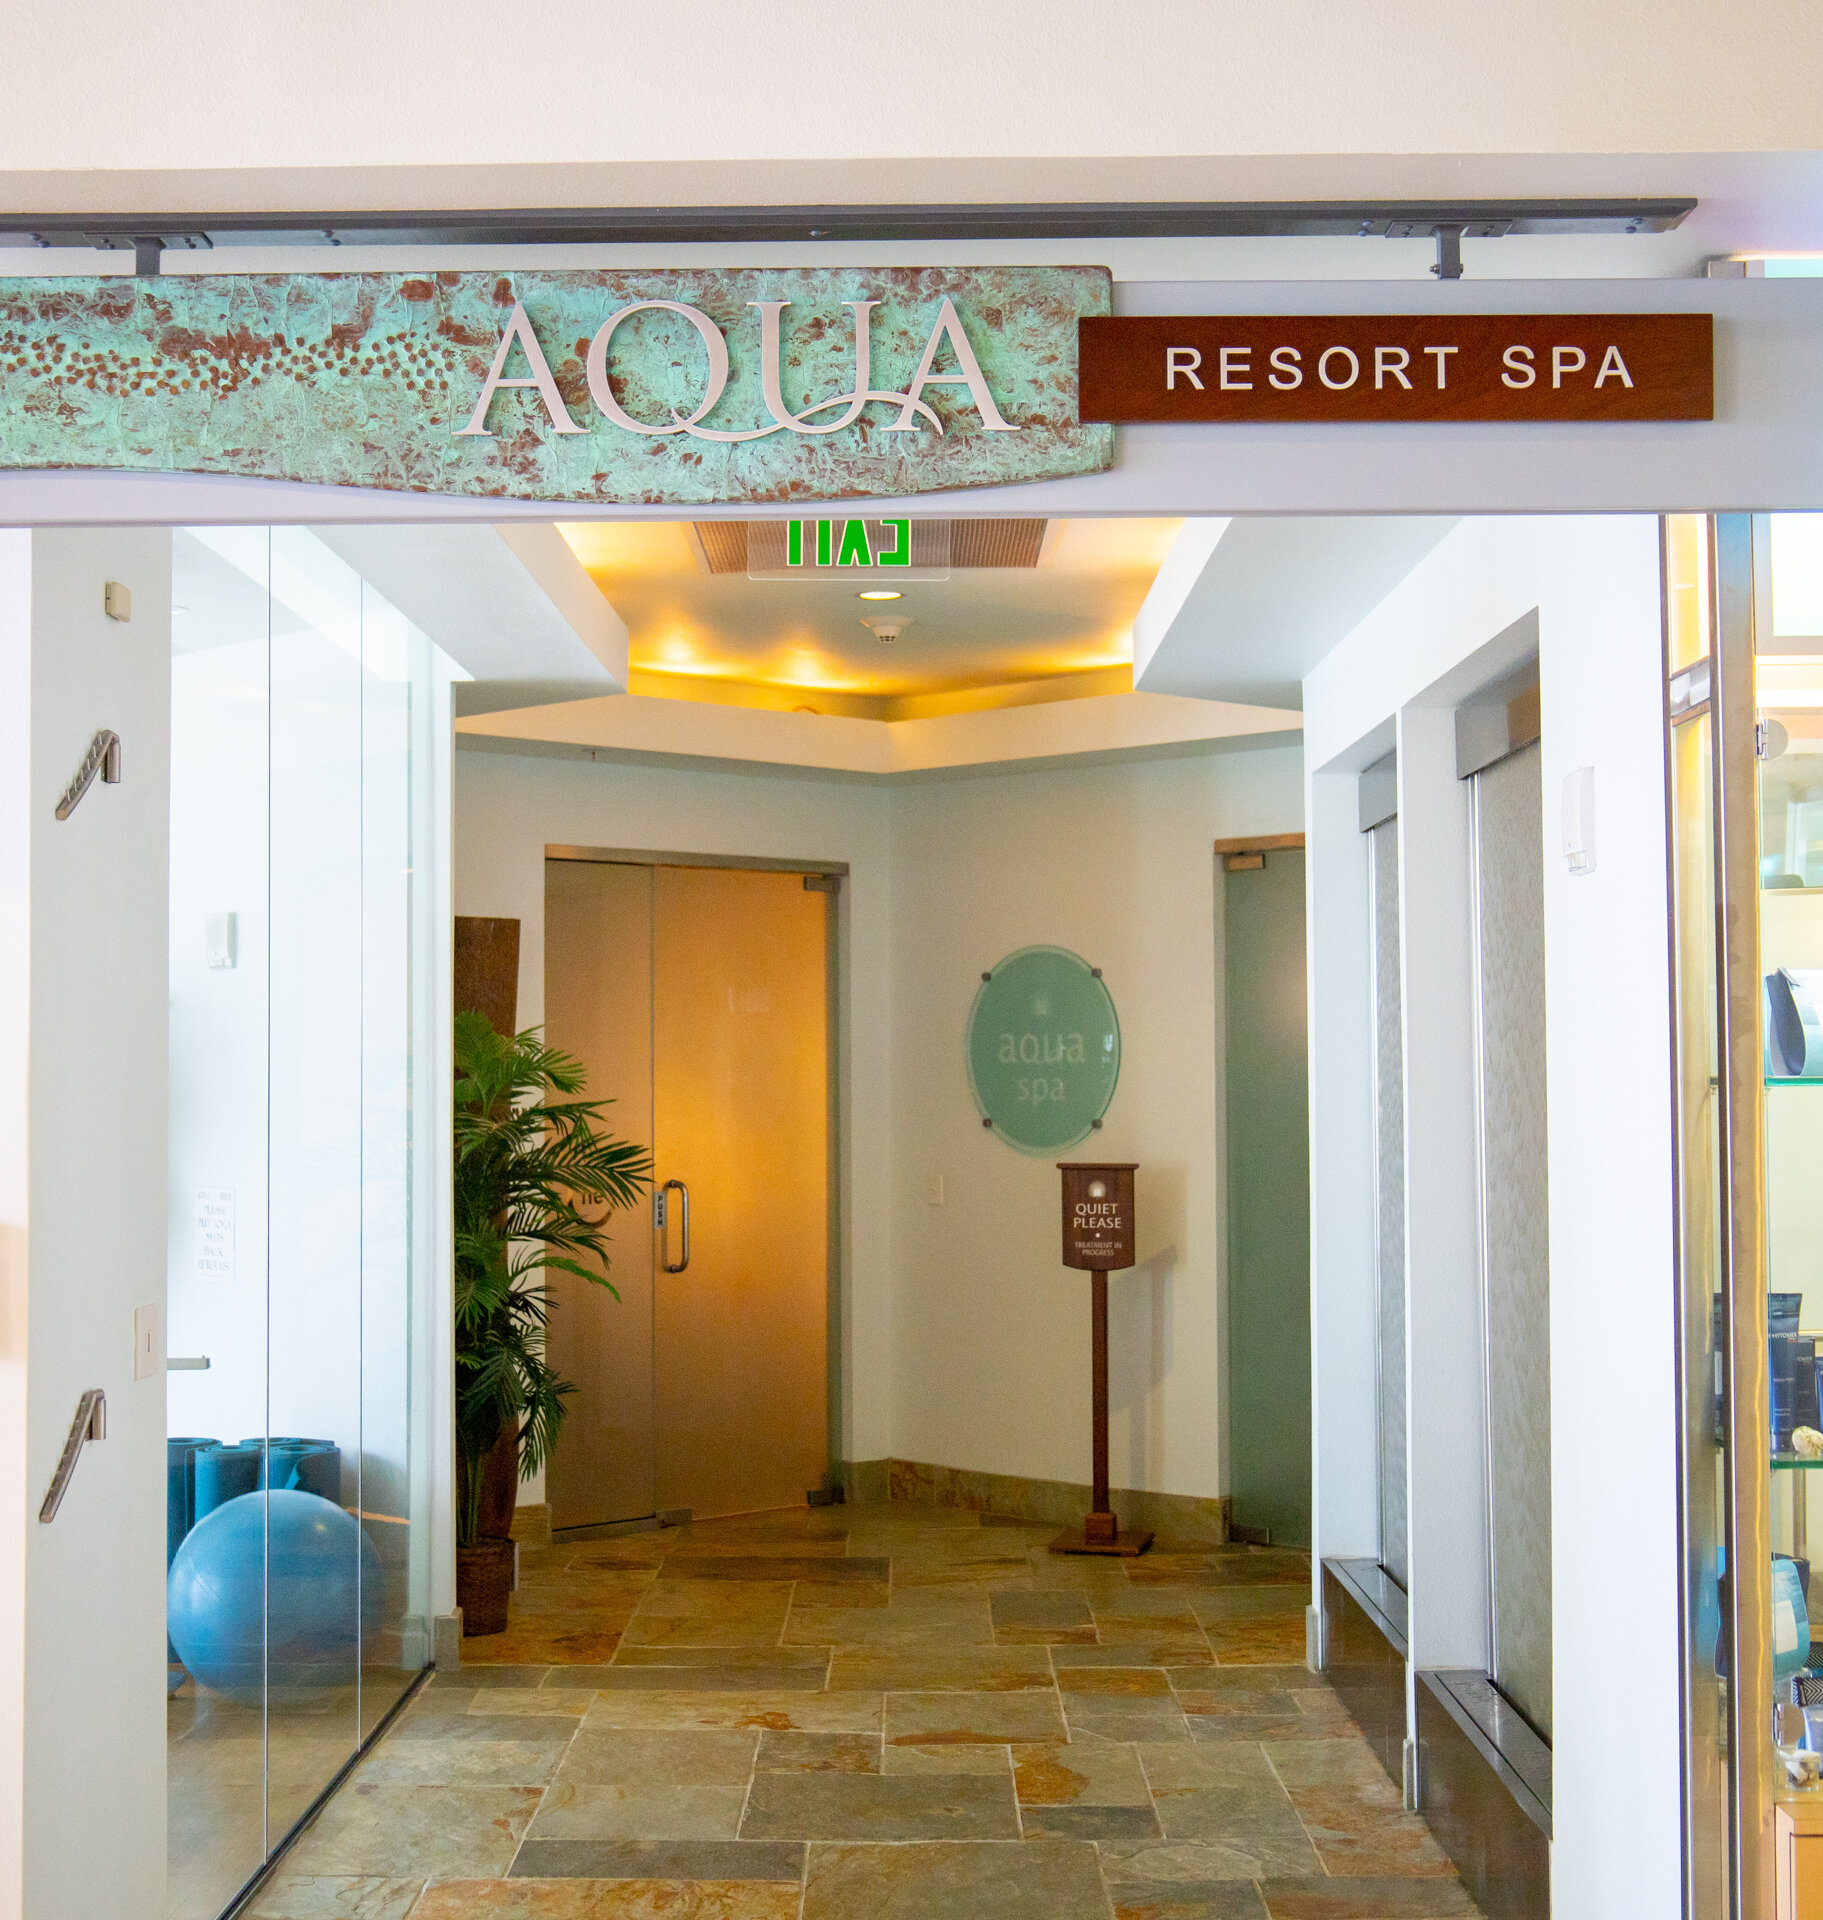 ✨Relaxation this way...
➡ Visit the link in our bio to view our spa services and book your spa day at Aqua Spa.